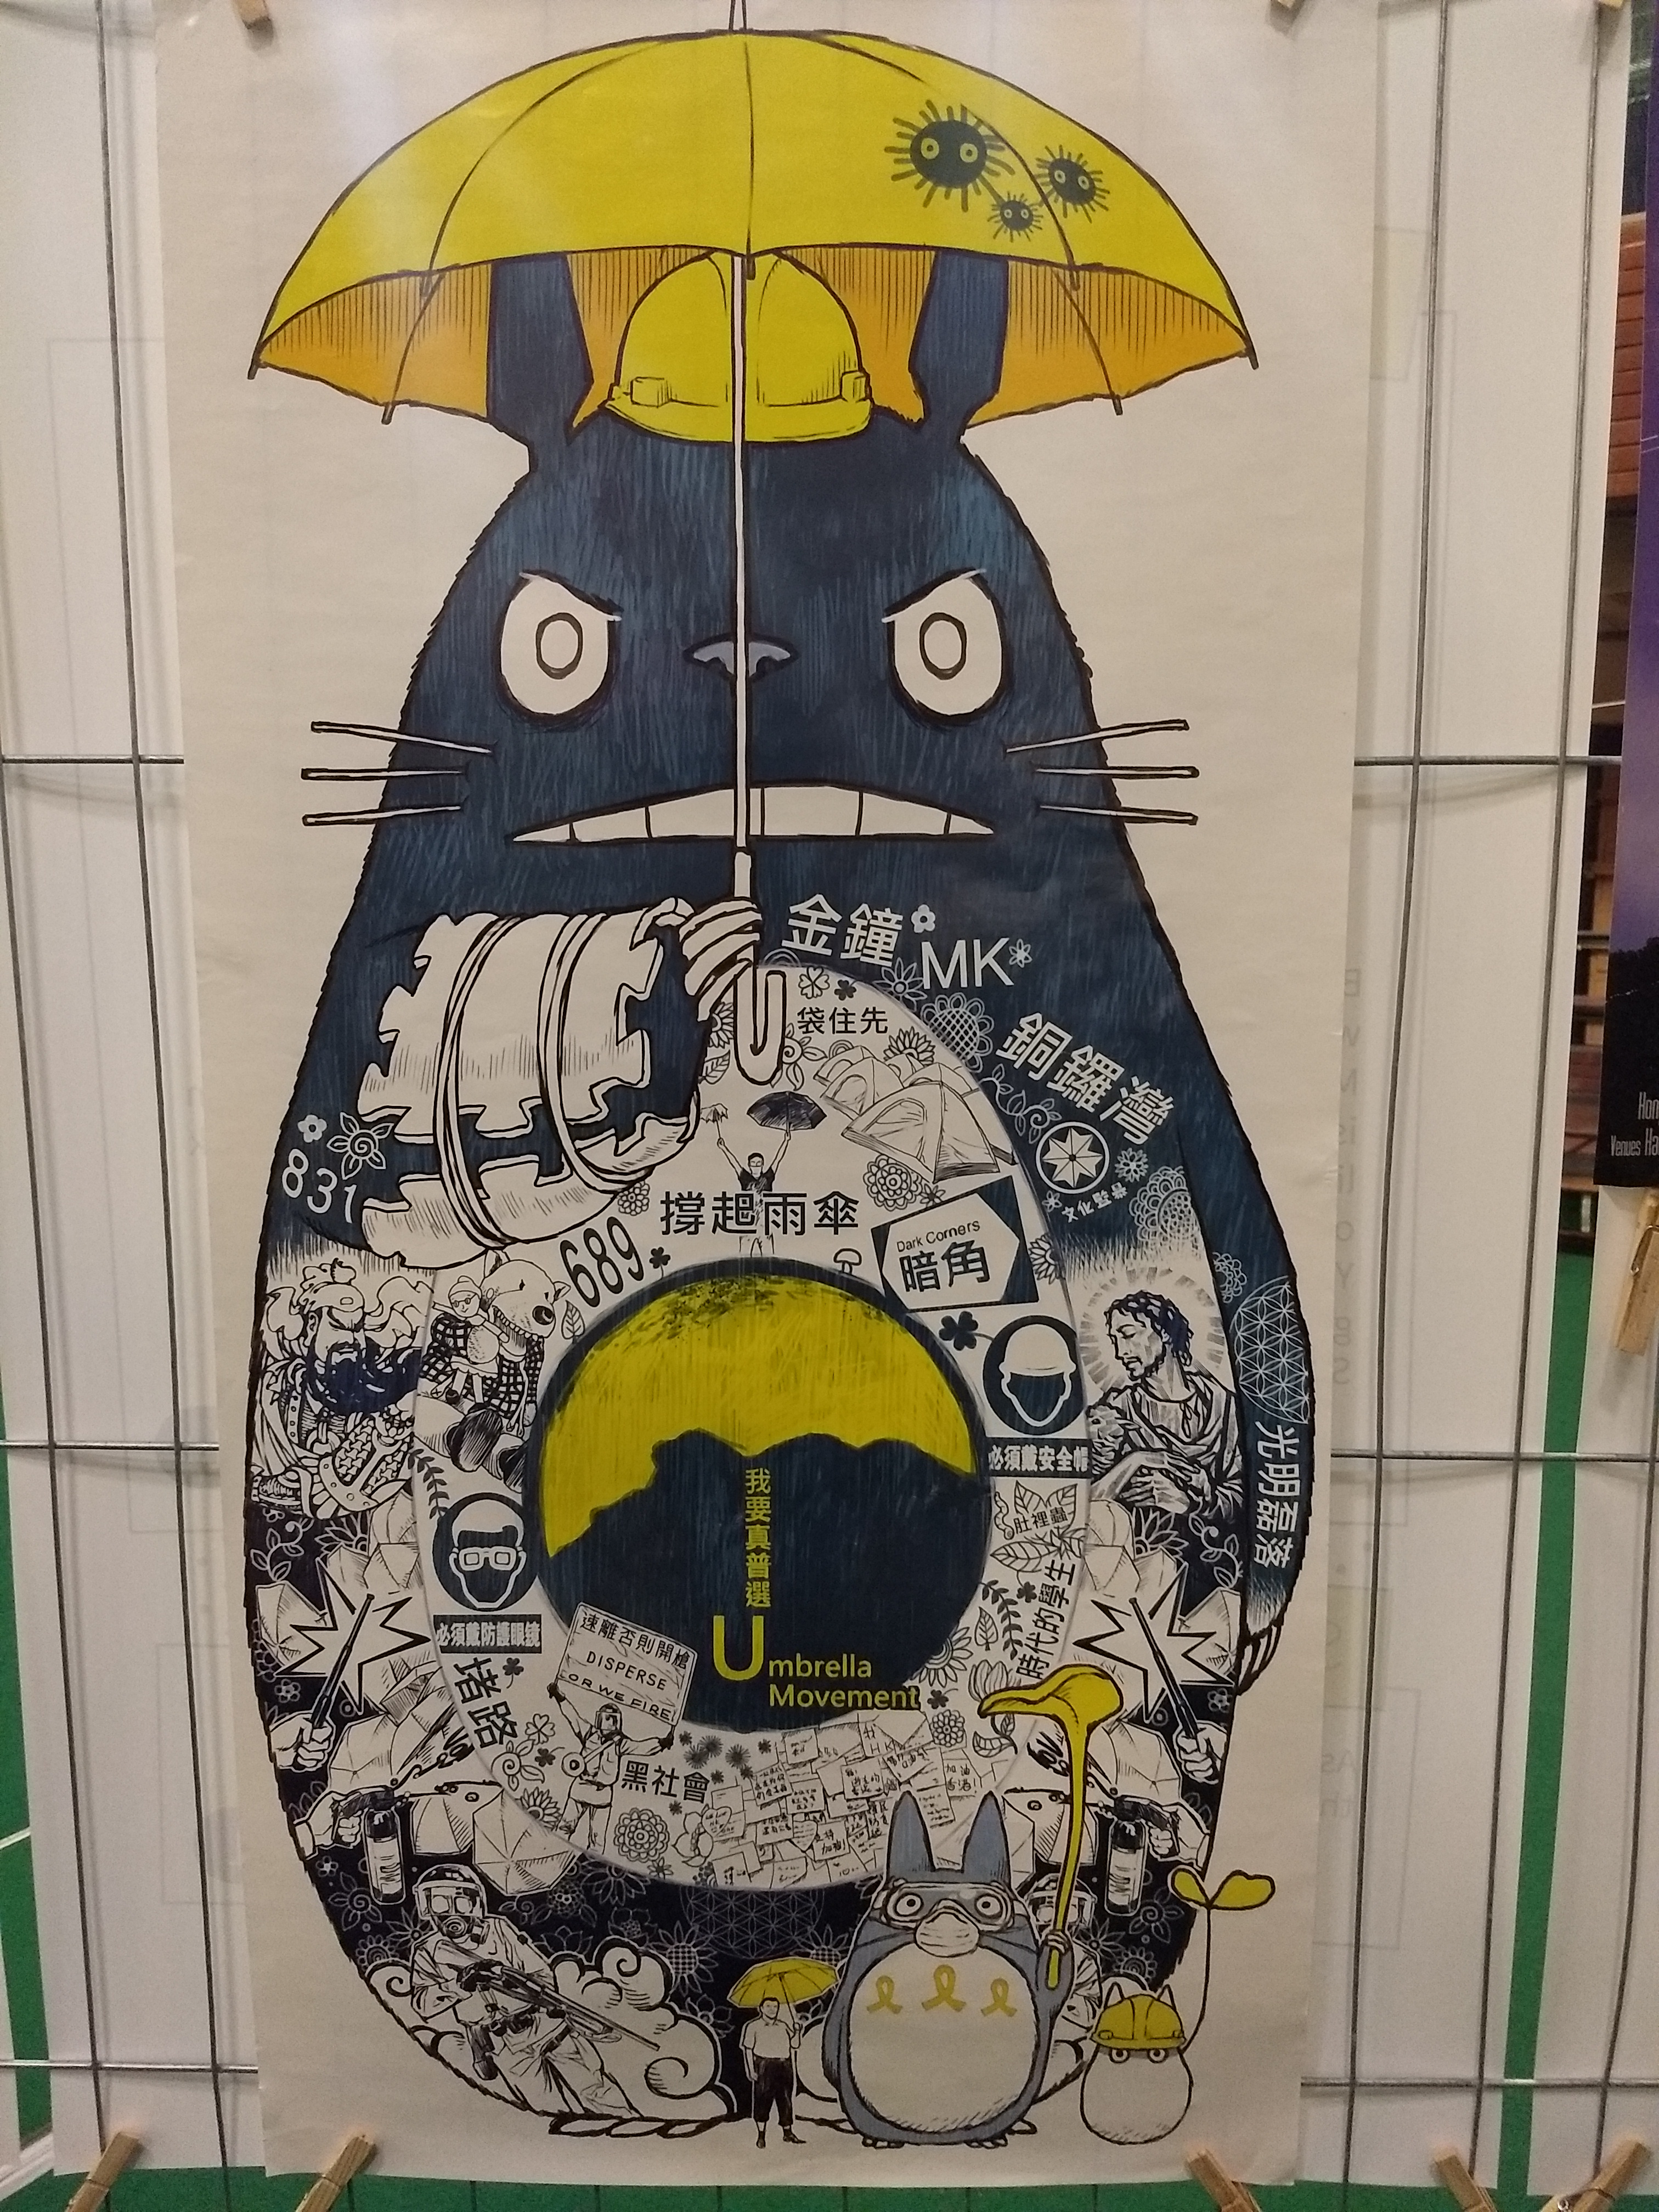 A drawing of an animal wearing a yellow hard hat and holding a yellow umbrella. The body of the animal is covered in protest drawings.